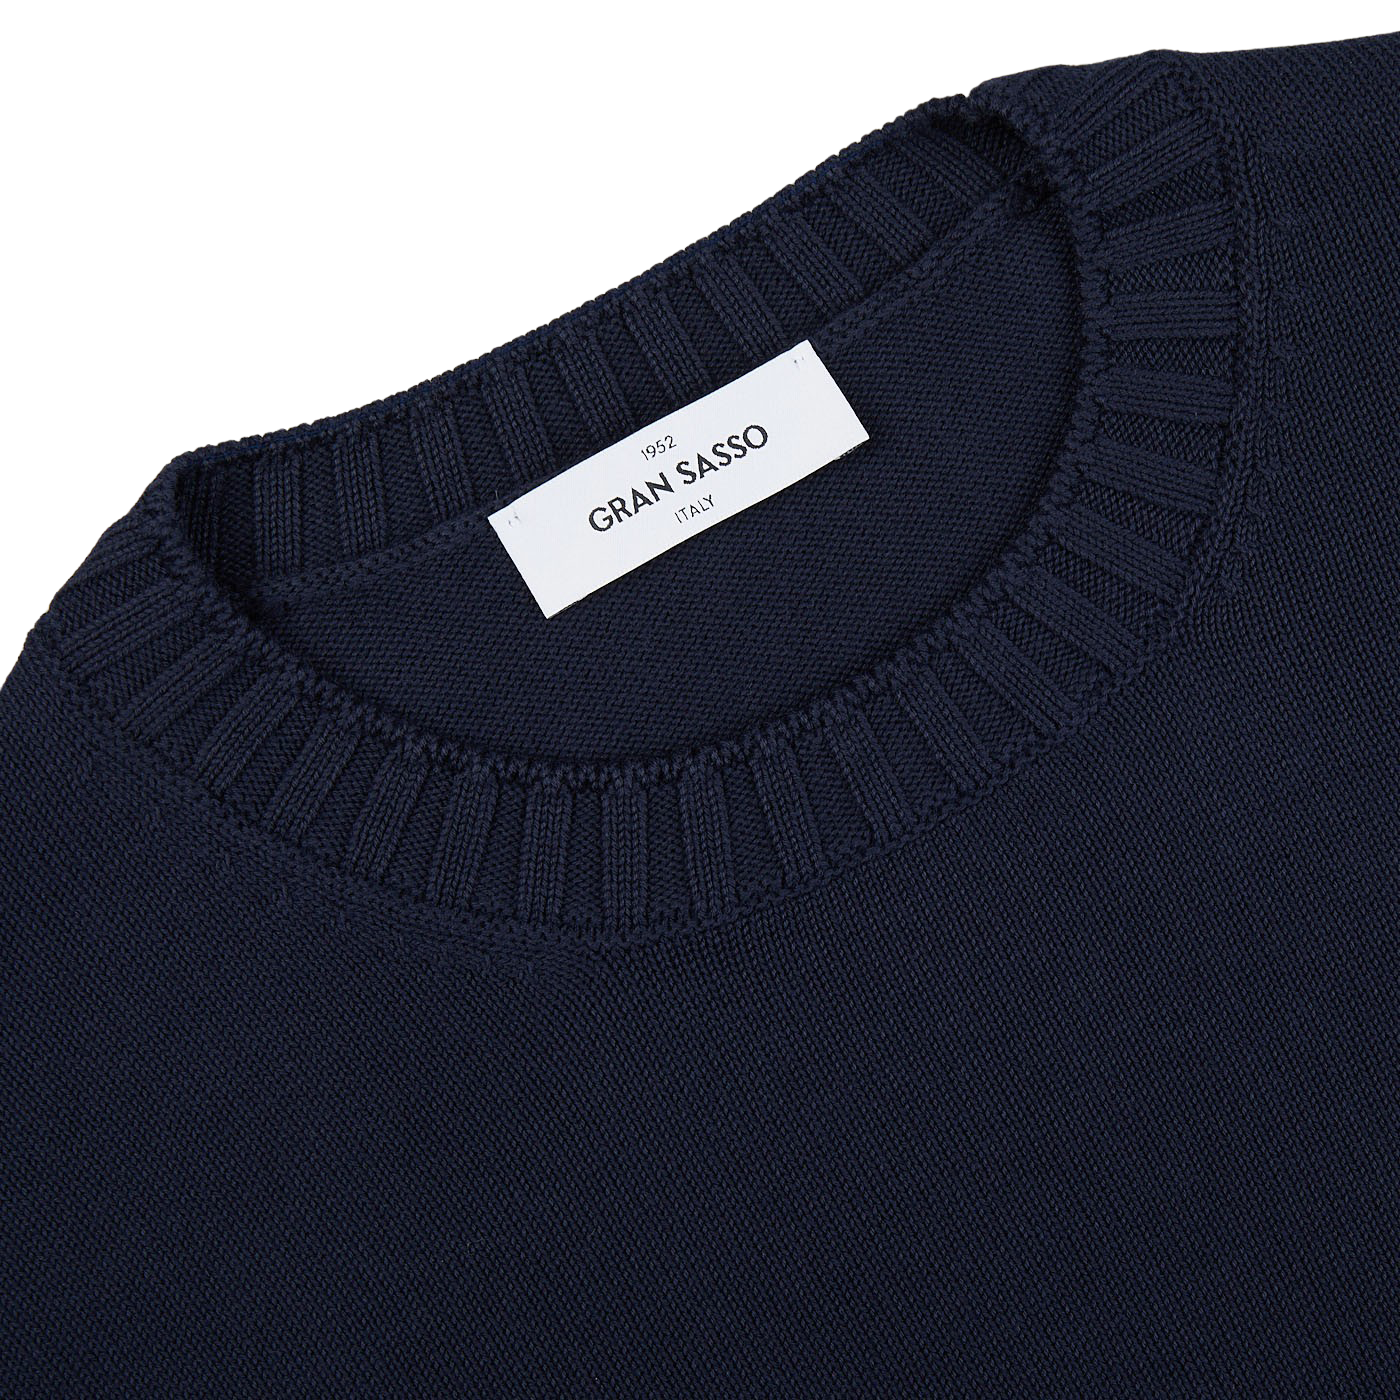 A close up of a Gran Sasso Navy Blue Egyptian Cotton Crewneck Sweater with a label on it.